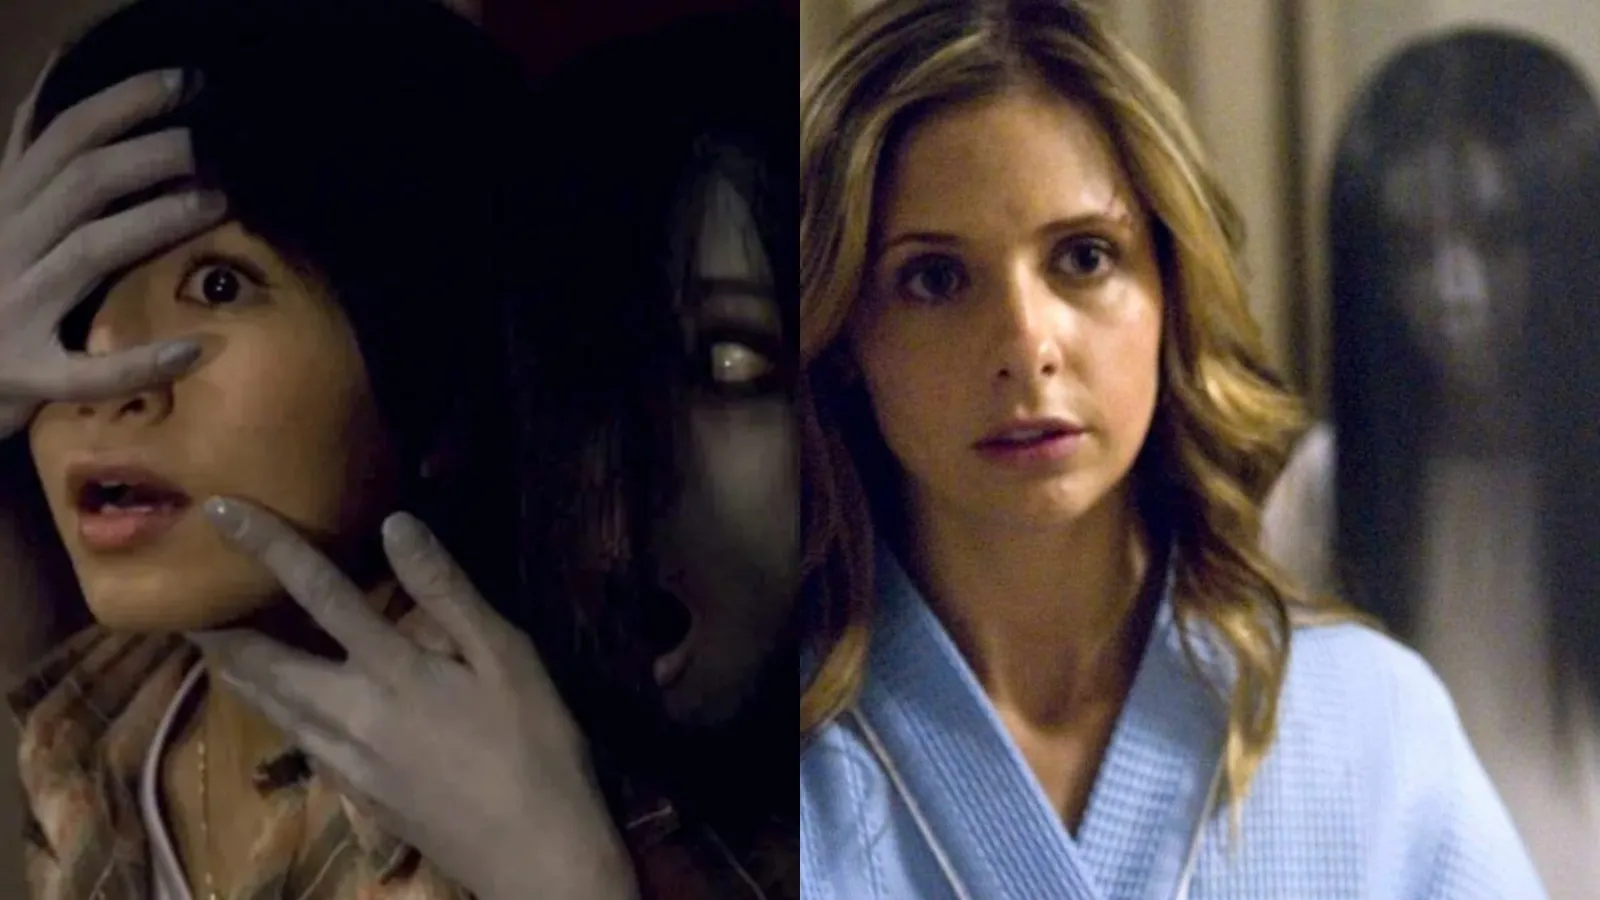 Screencaps from The Grudge (2002) (left) and The Grudge (2004) (right)